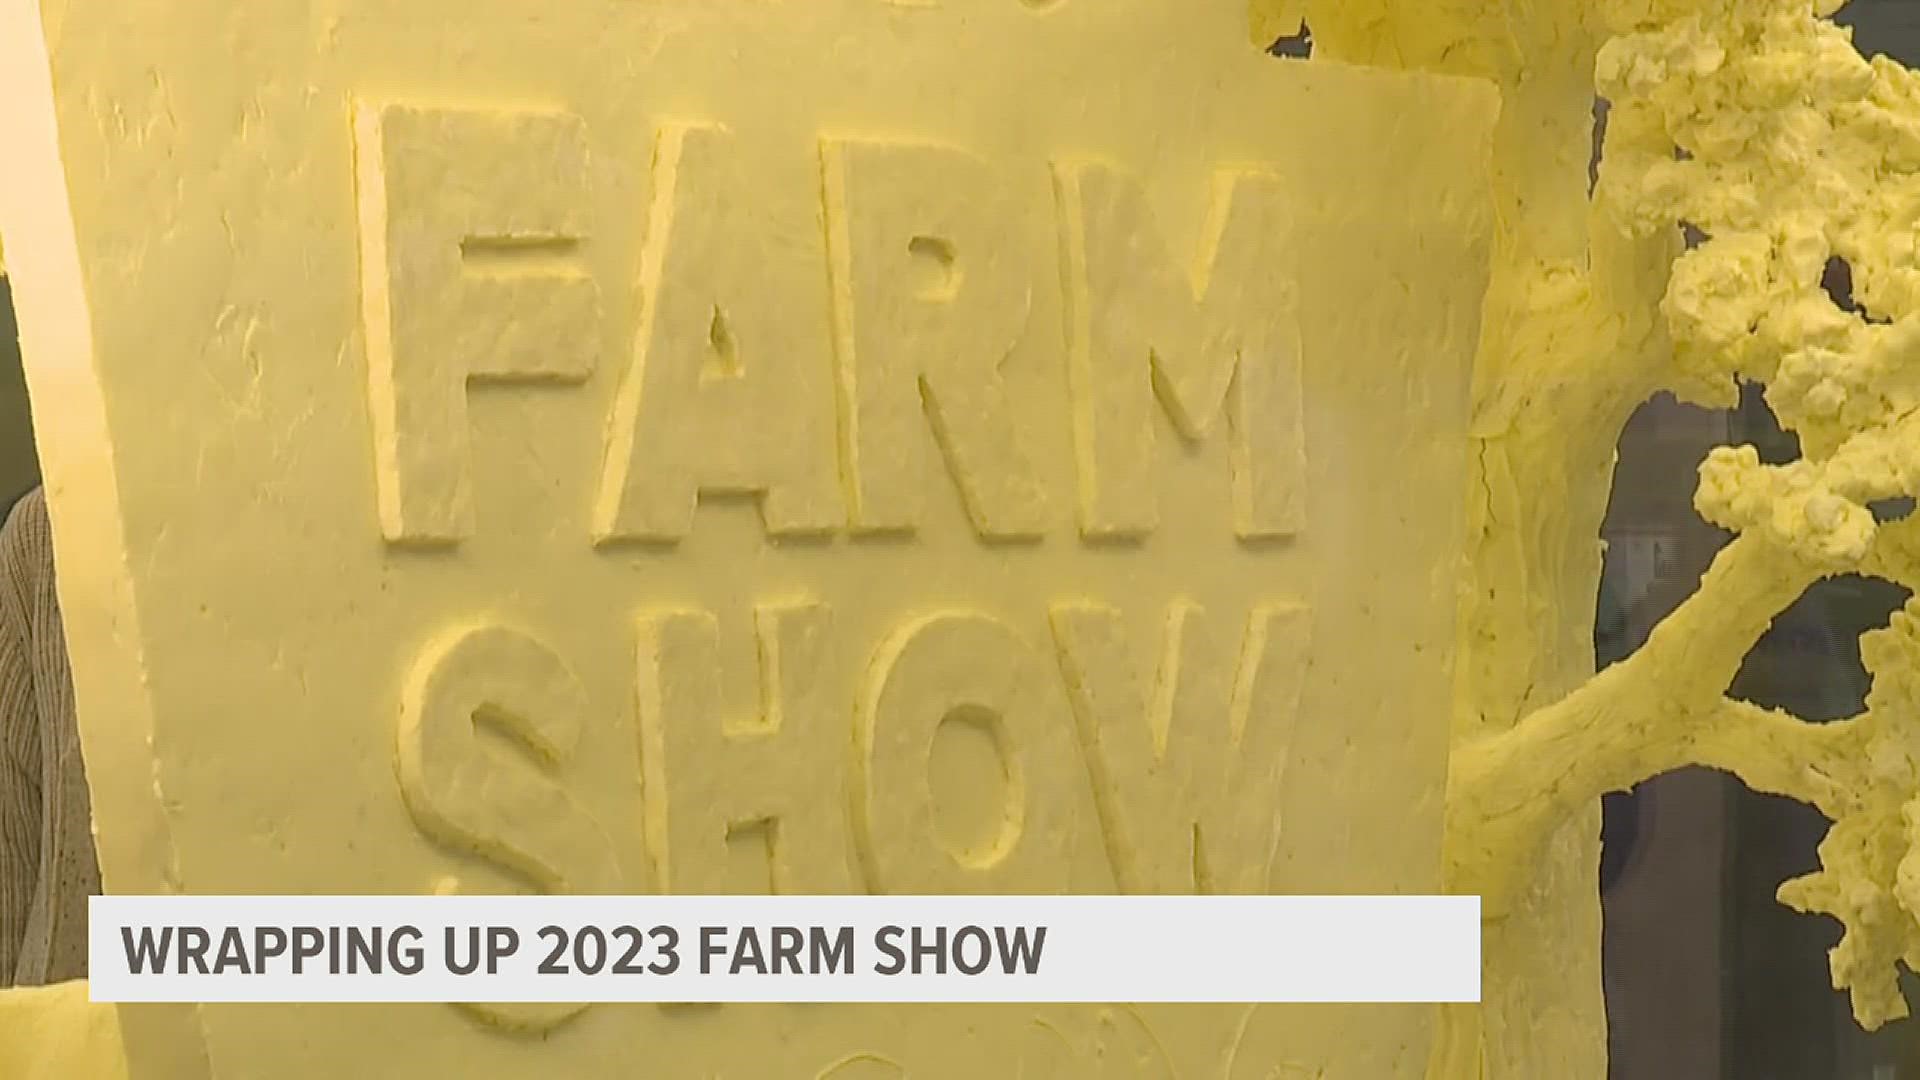 2023 didn't take long to hit a high. We're looking back at all the action from this year's Pennsylvania Farm Show.